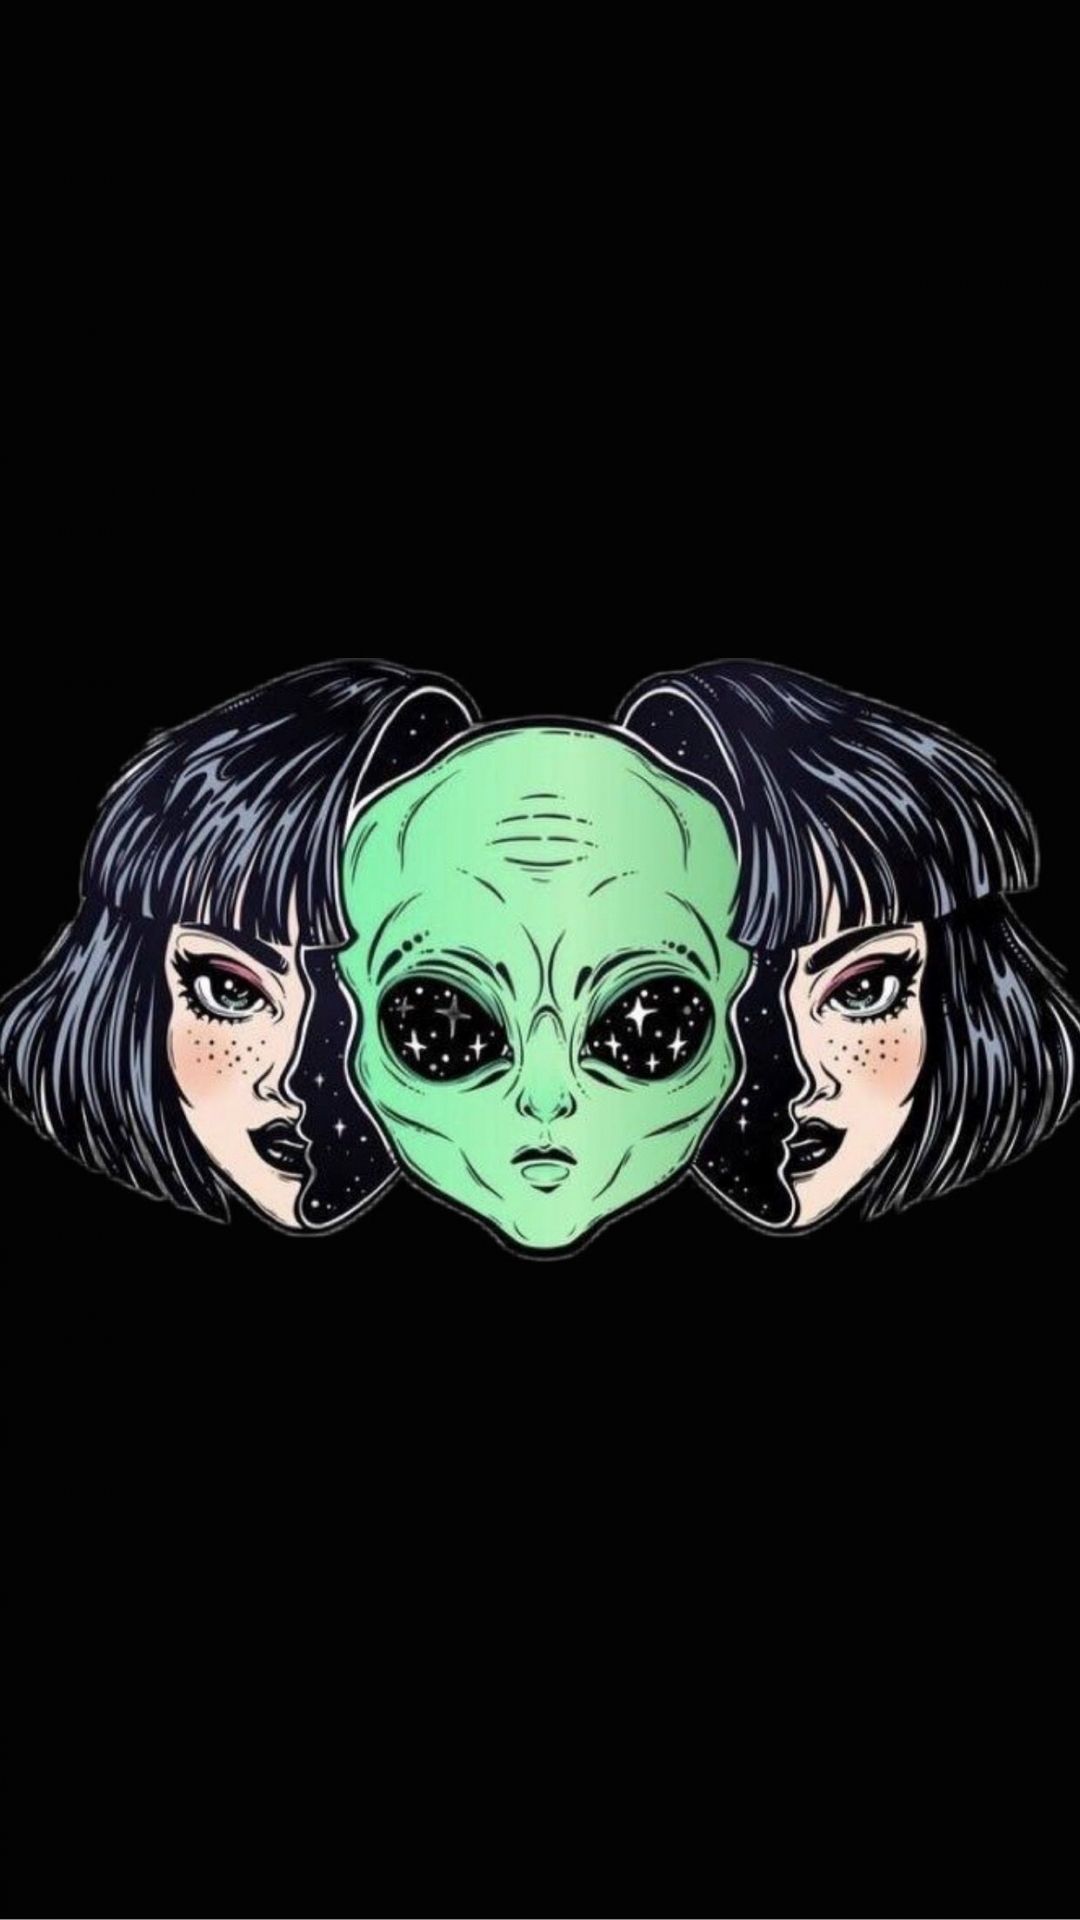 Aesthetic Cute Alien Wallpaper Android Download in 2020